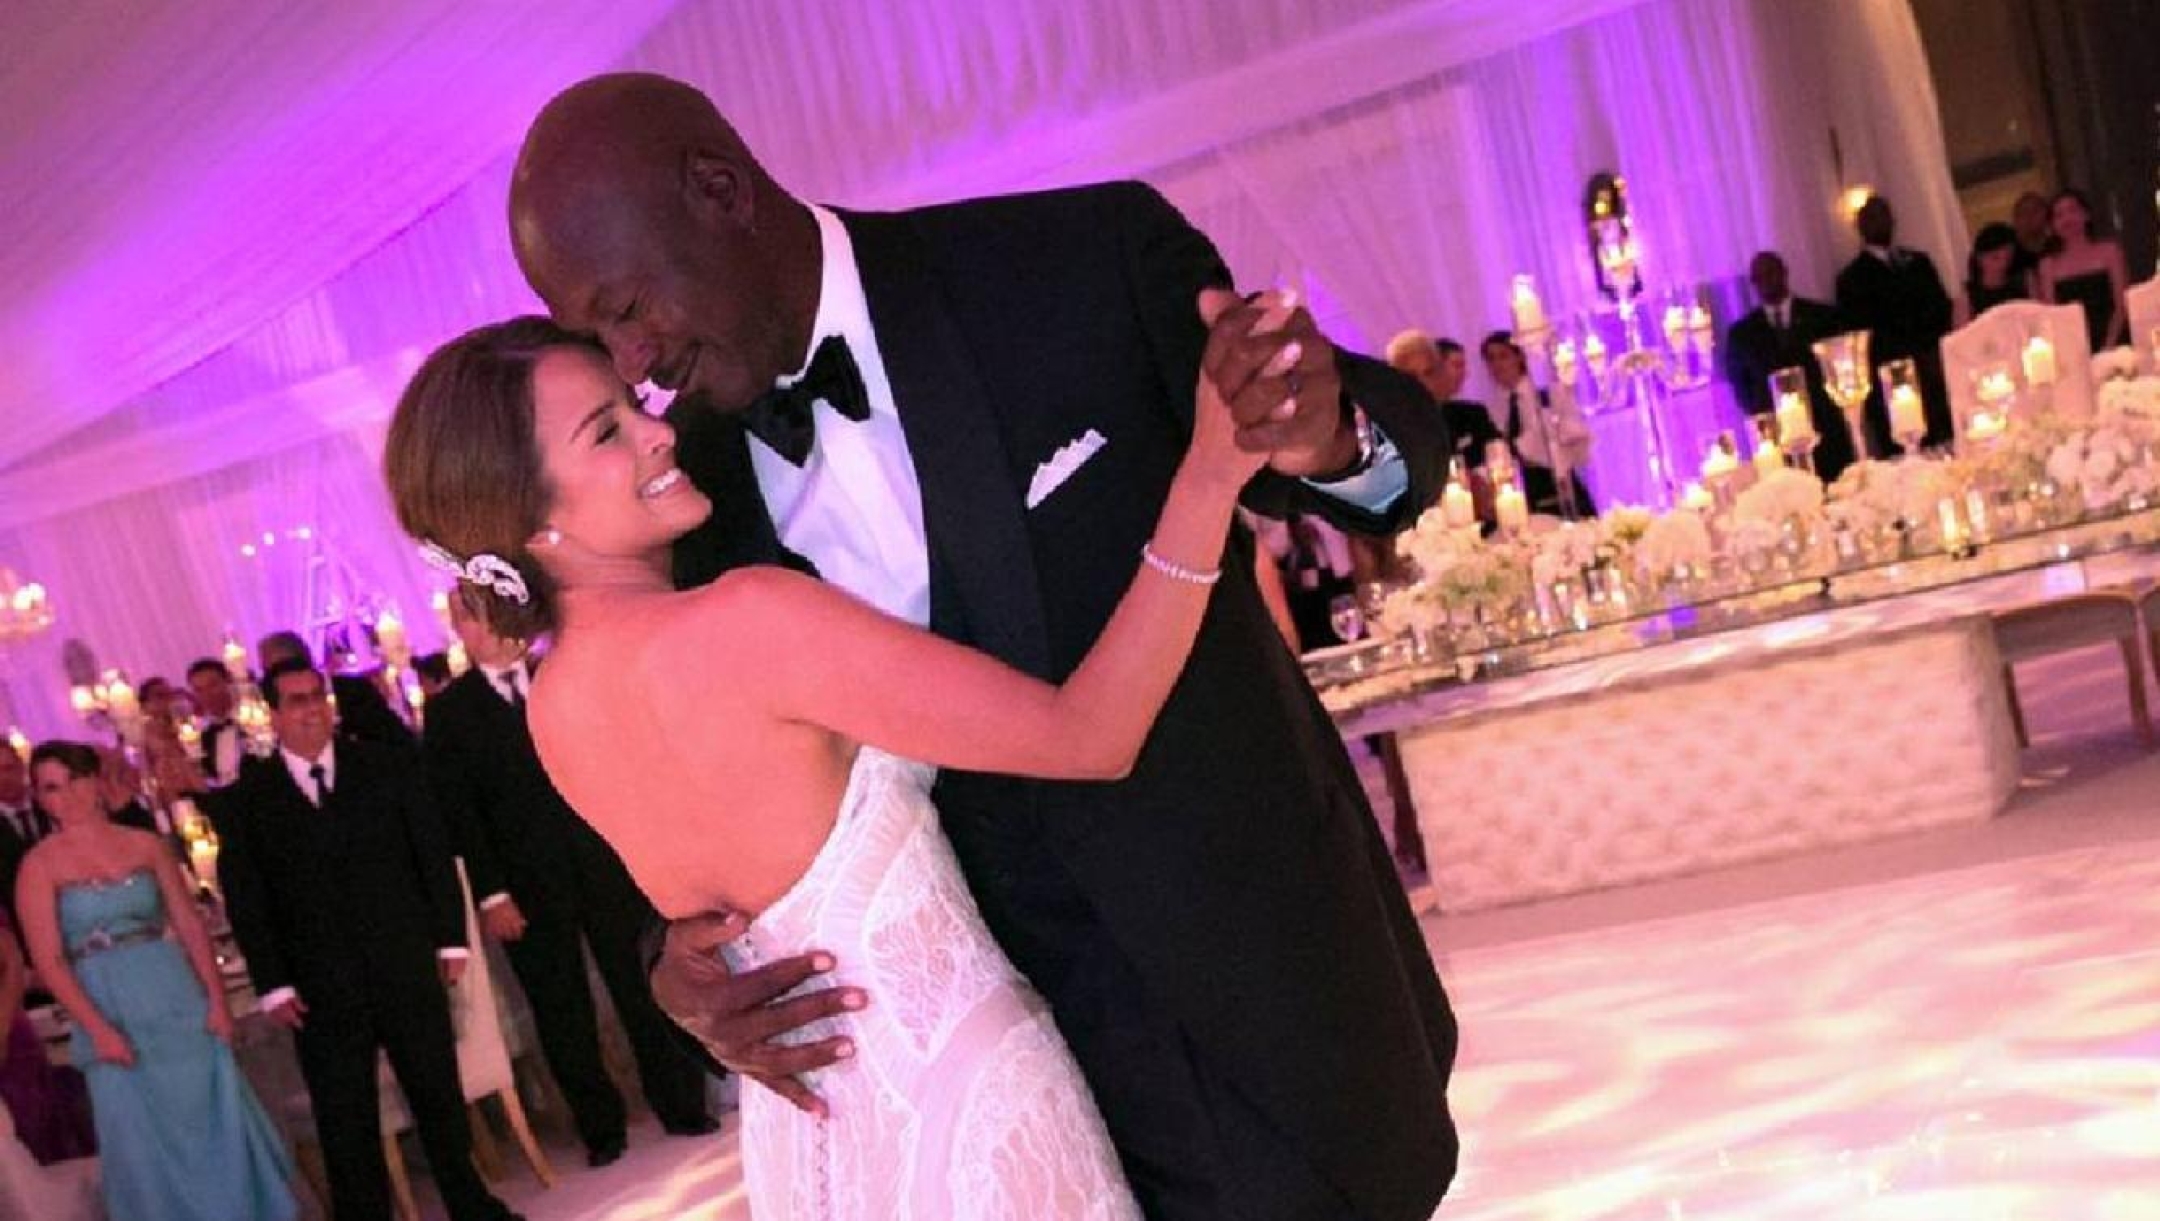 JUPITER, FL - APRIL 27: Michael Jordan dances with bride Yvette Prieto during their wedding reception at the Bear's Club on April 27, 2013 in Jupiter, Florida. The wedding took place at the Episcopal Church of Bethesda-by-the-Sea in Palm Beach, Florida.   Joe Buissink/Getty Images/AFP== FOR NEWSPAPERS, INTERNET, TELCOS & TELEVISION USE ONLY ==